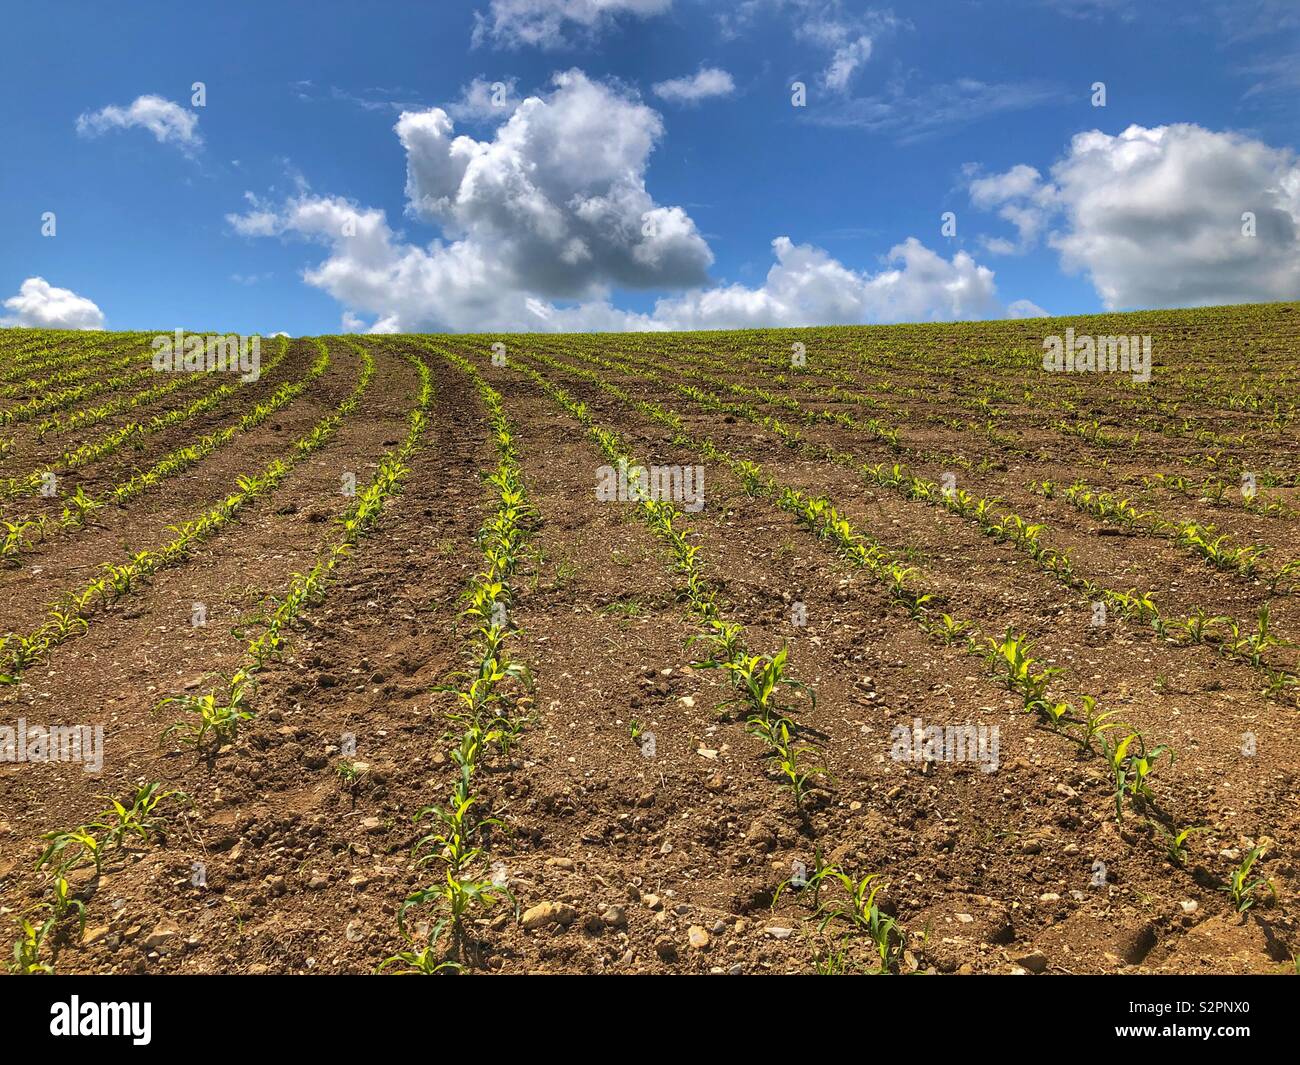 Field of young maize plants under a blue sky, Somerset, England Stock Photo